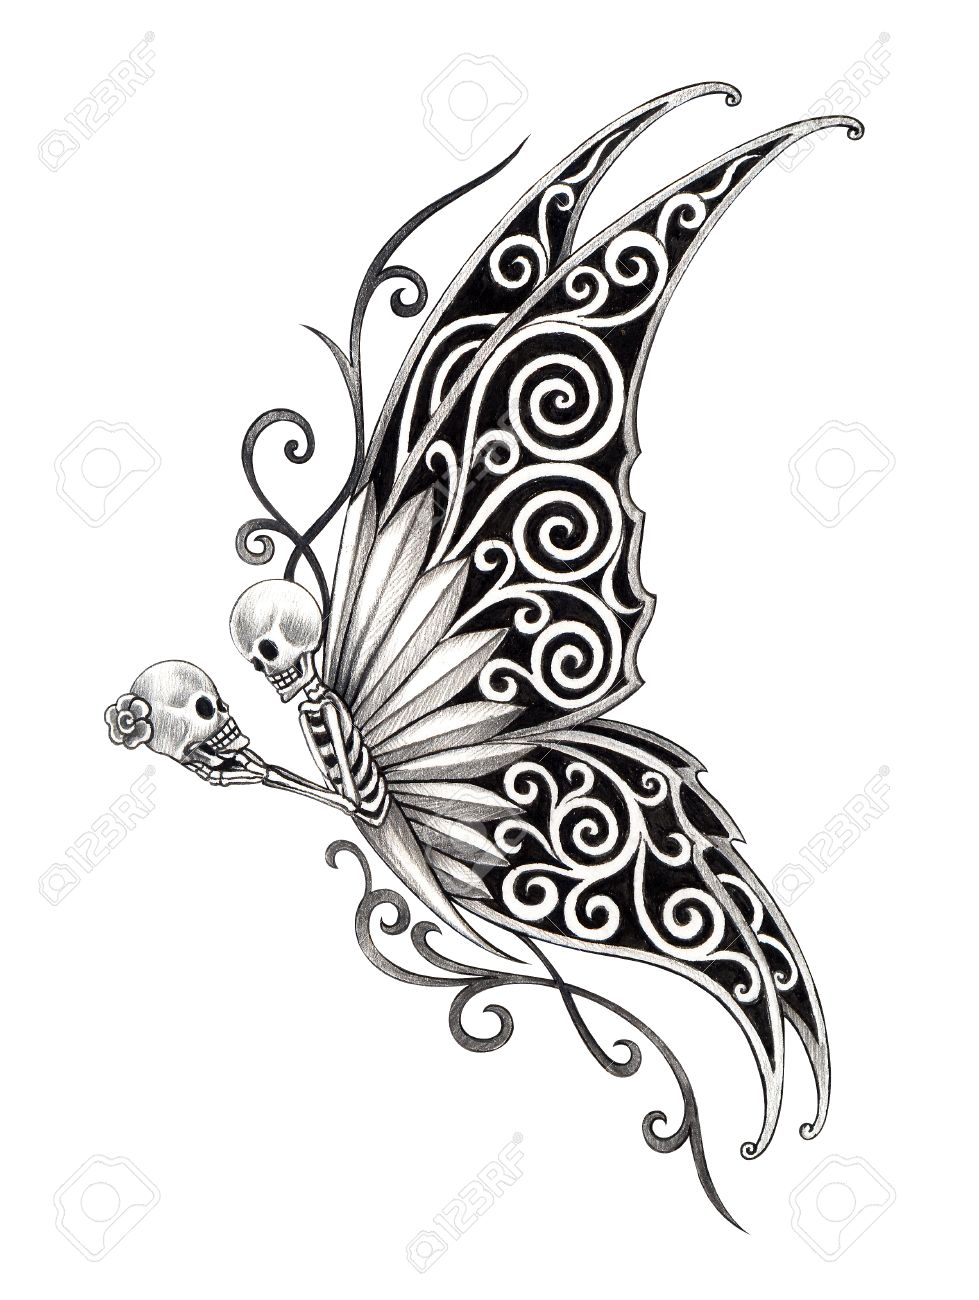 Art Skull Butterfly Tattoo Hand Drawing On Paper Stock Photo with regard to dimensions 979 X 1300